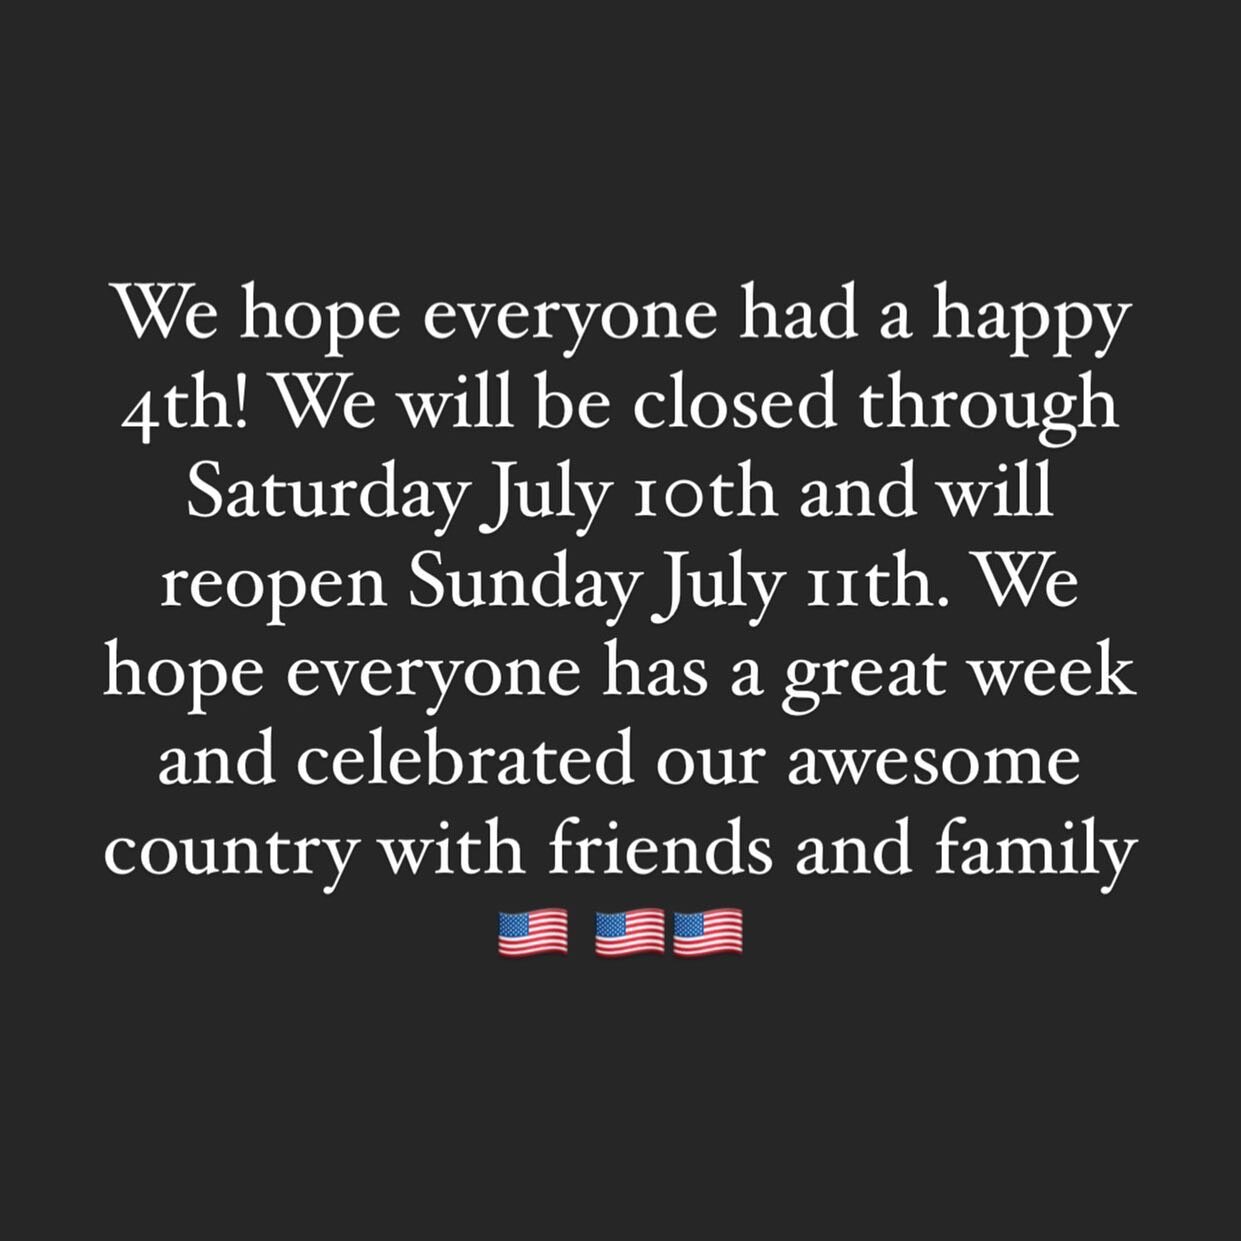 We hope y&rsquo;all had a great 4th!